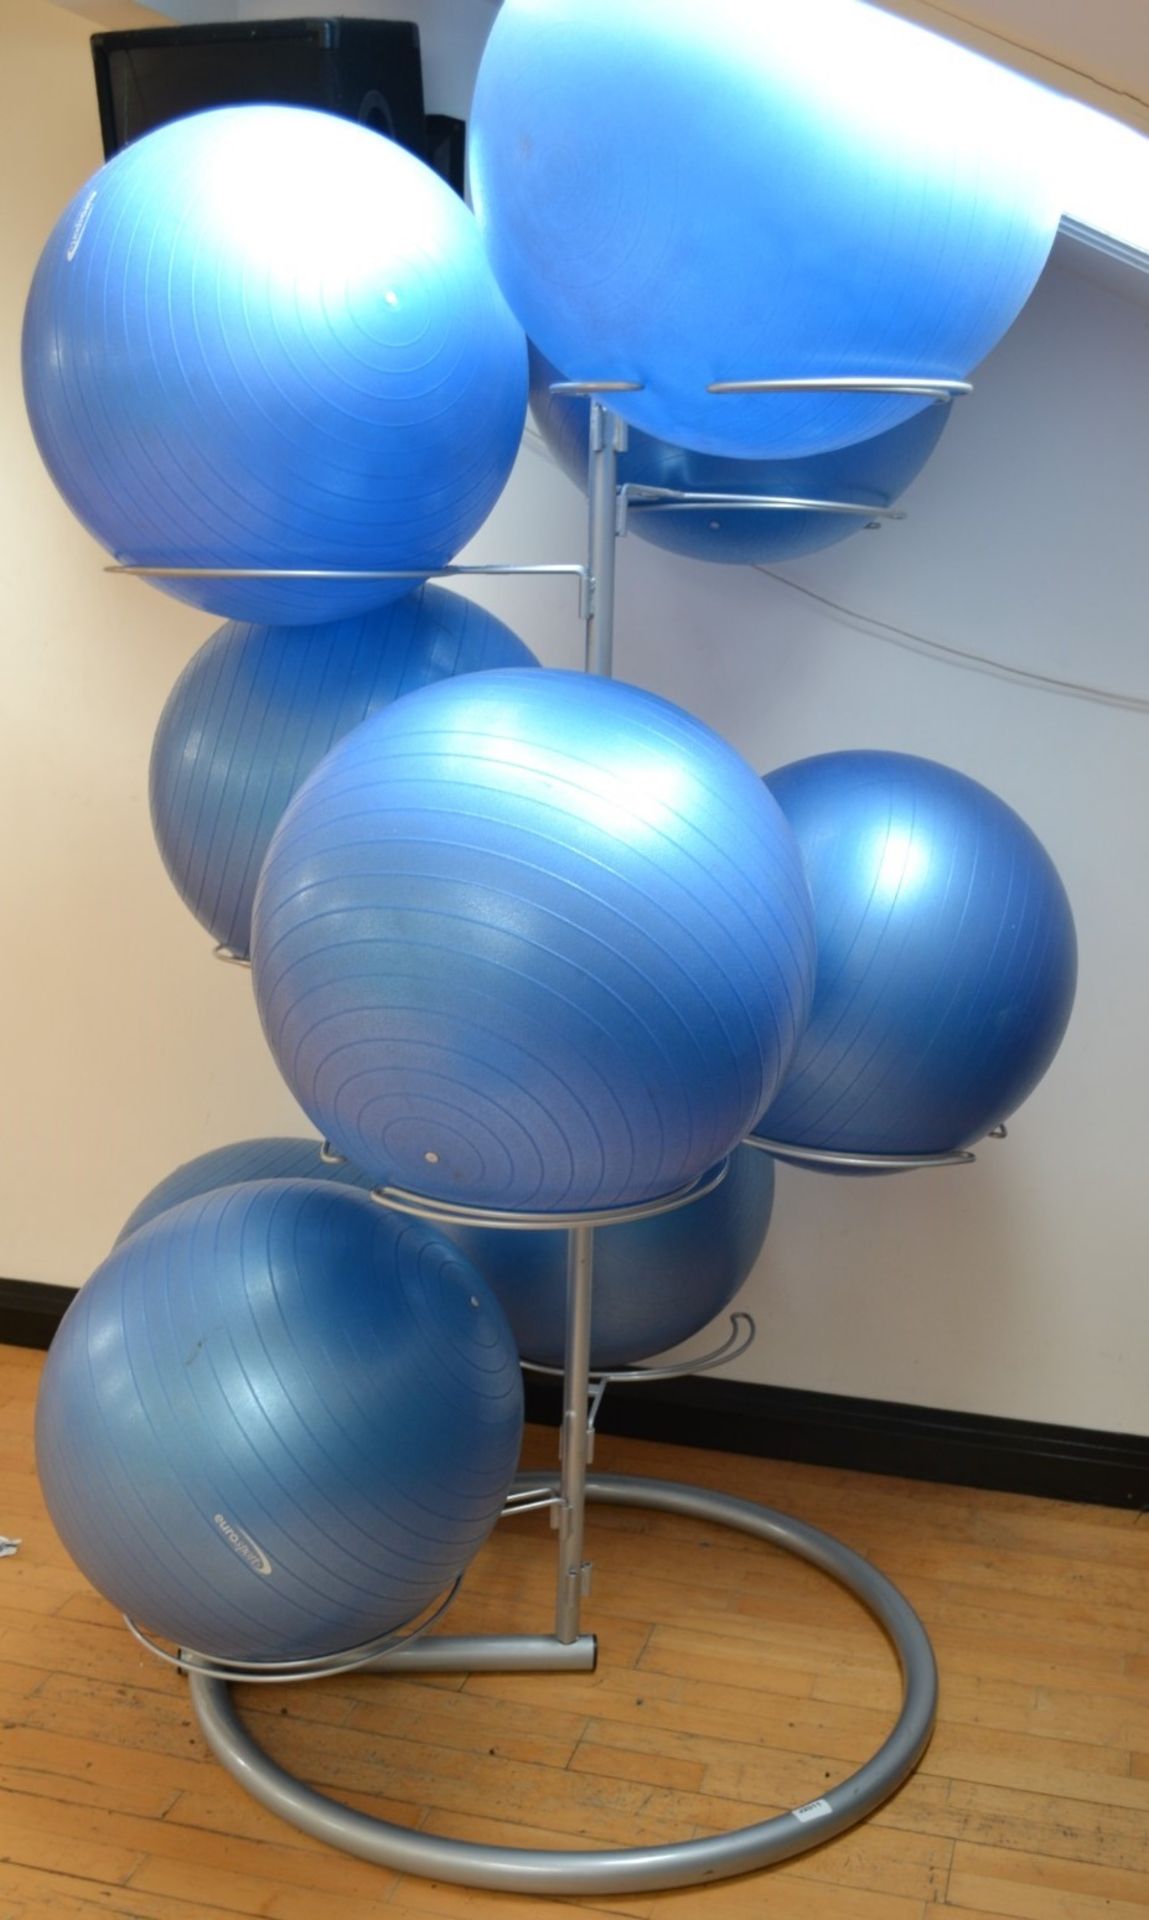 1 x Exercise Ball Holder With 9 x Exercise Balls - Dimensions: H180 x L100cm - Ref: J2011/1FDS - - Image 3 of 3